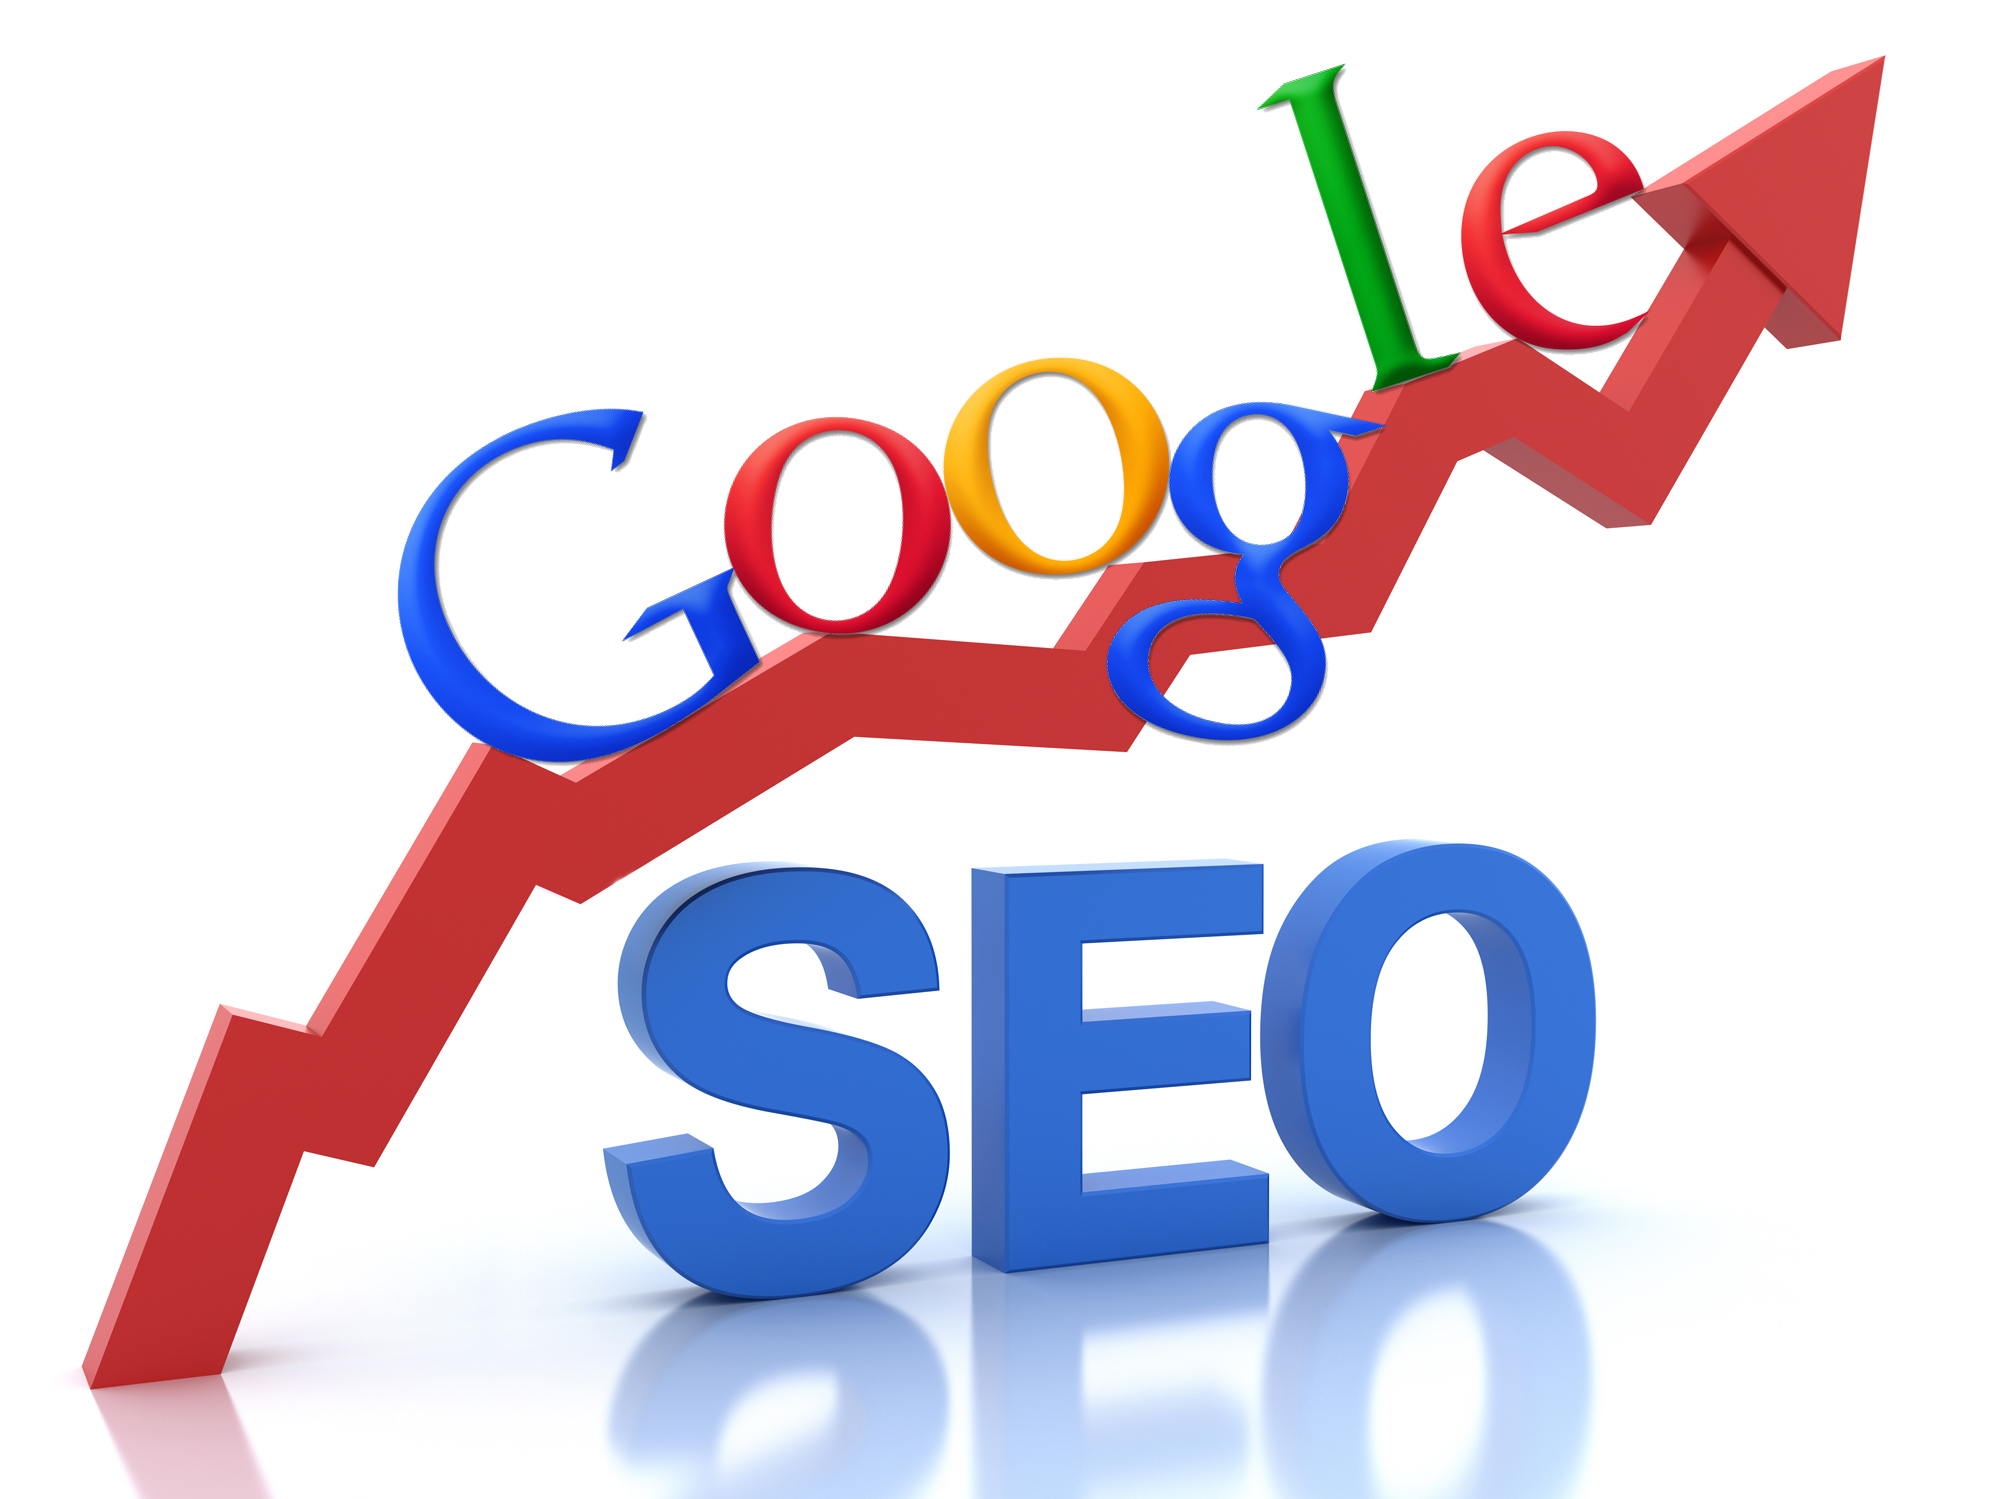 How to Find the Best SEO Help Wanted Jobs by SEO Job Search